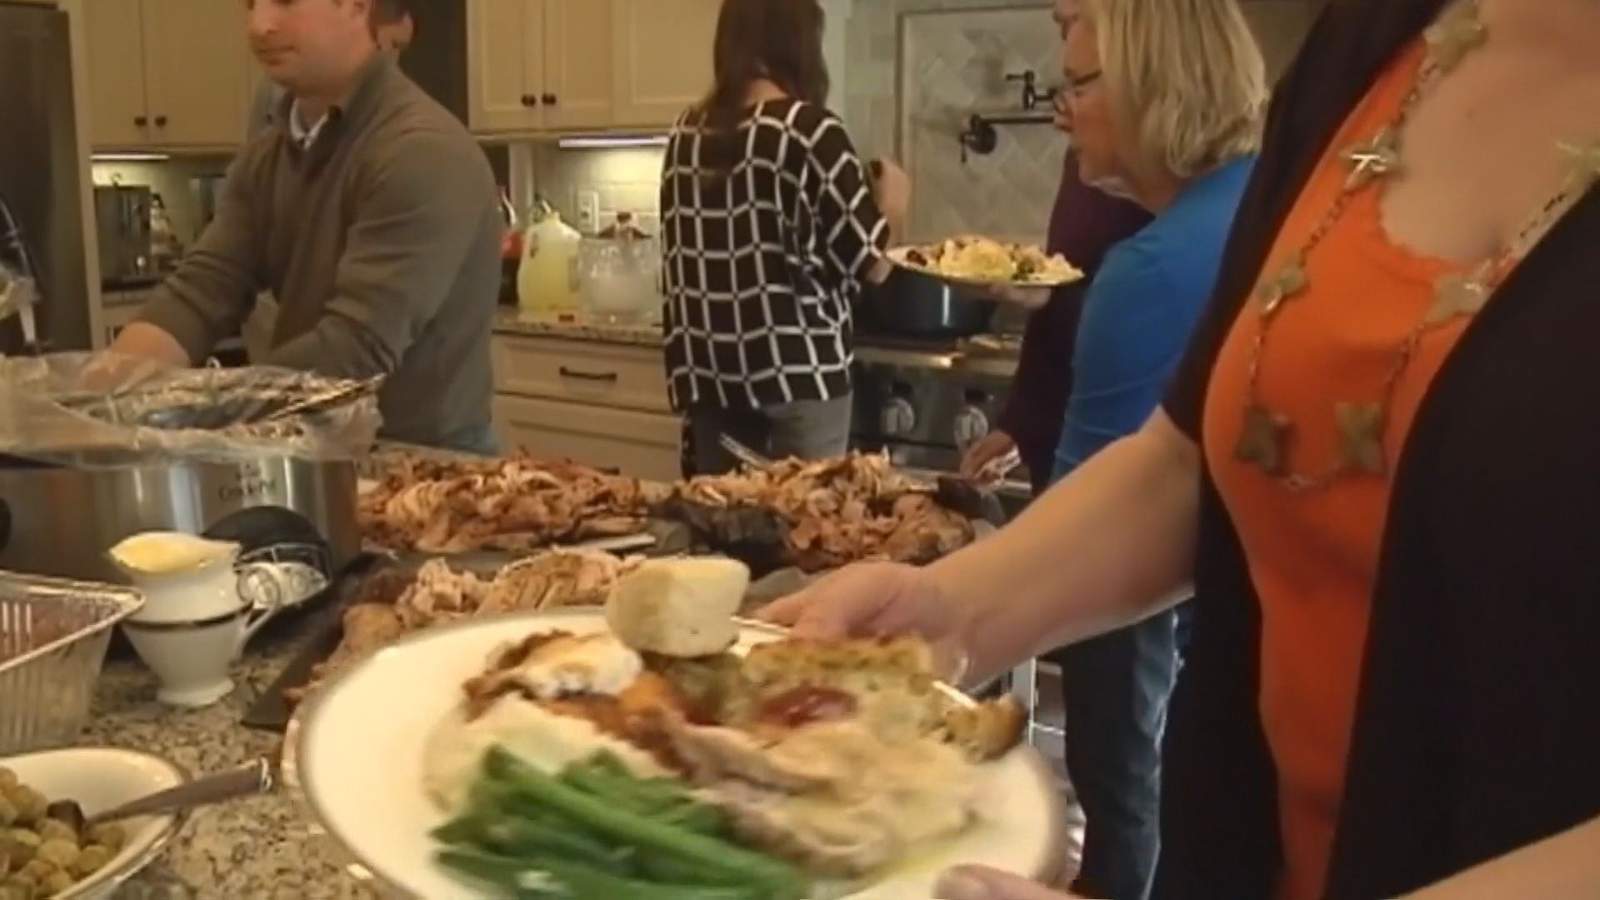 Medical expert urges families to keep Thanksgiving dinner to ‘quarantine bubble’